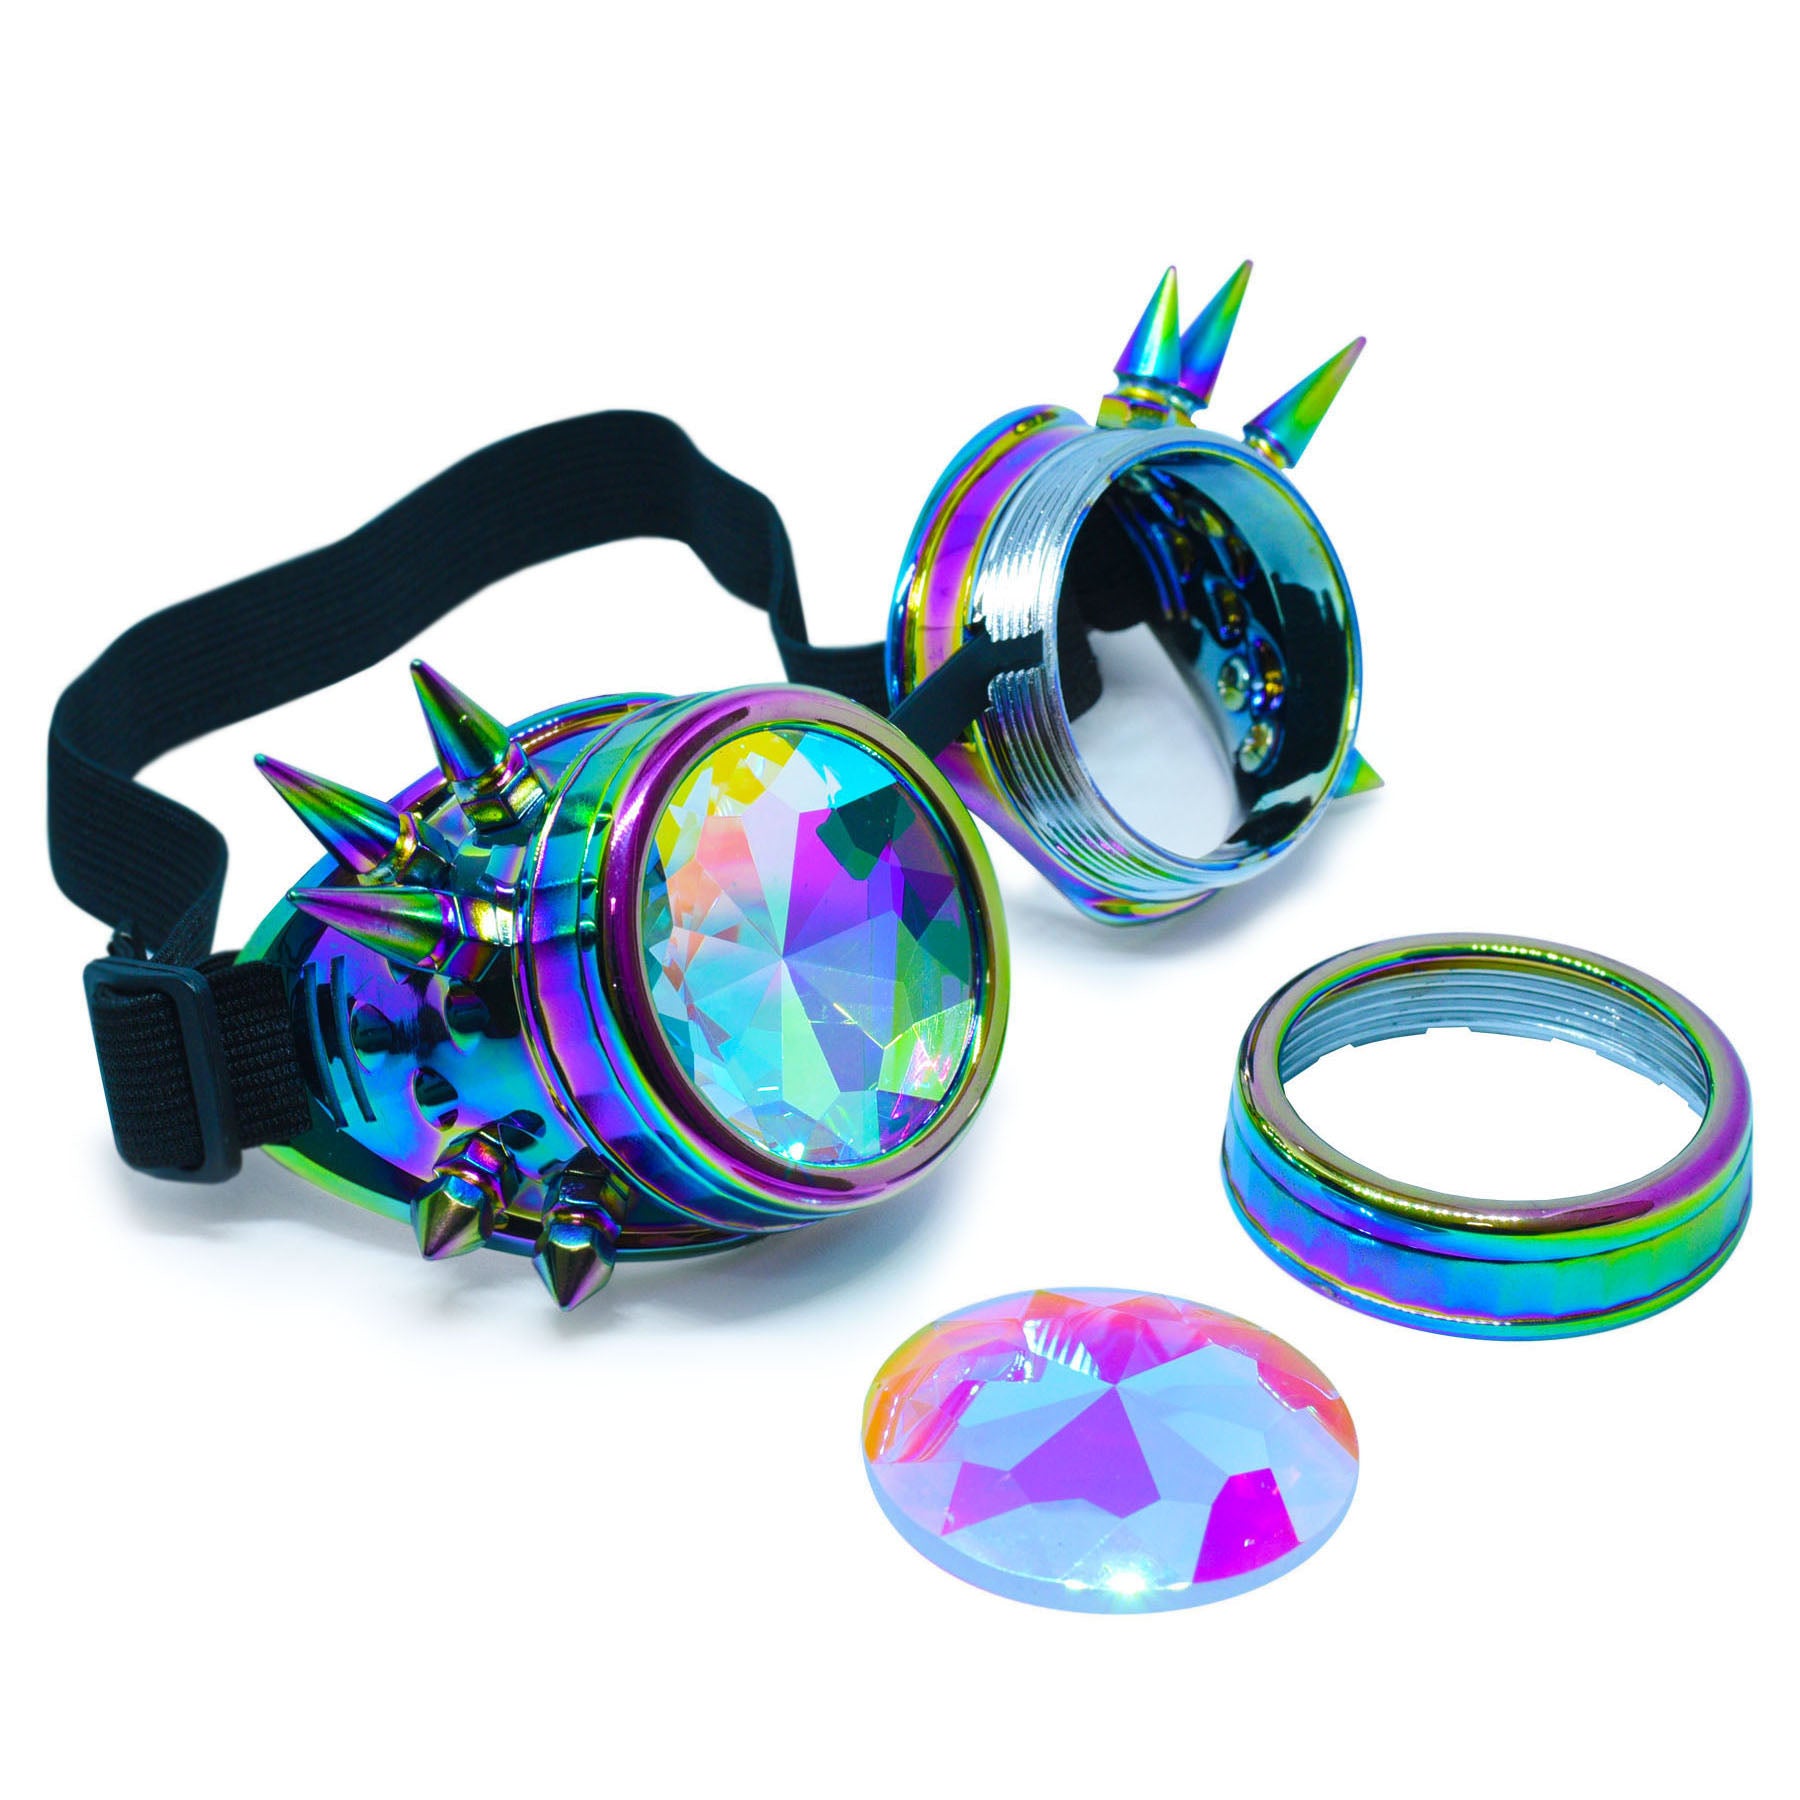 Iridescent Rainbow Steampunk Goggles Kaleidoscope Glasses - Trippy Psychedelic Rave Goggles - Funky Prism Glasses For Raves - Festival Accessories